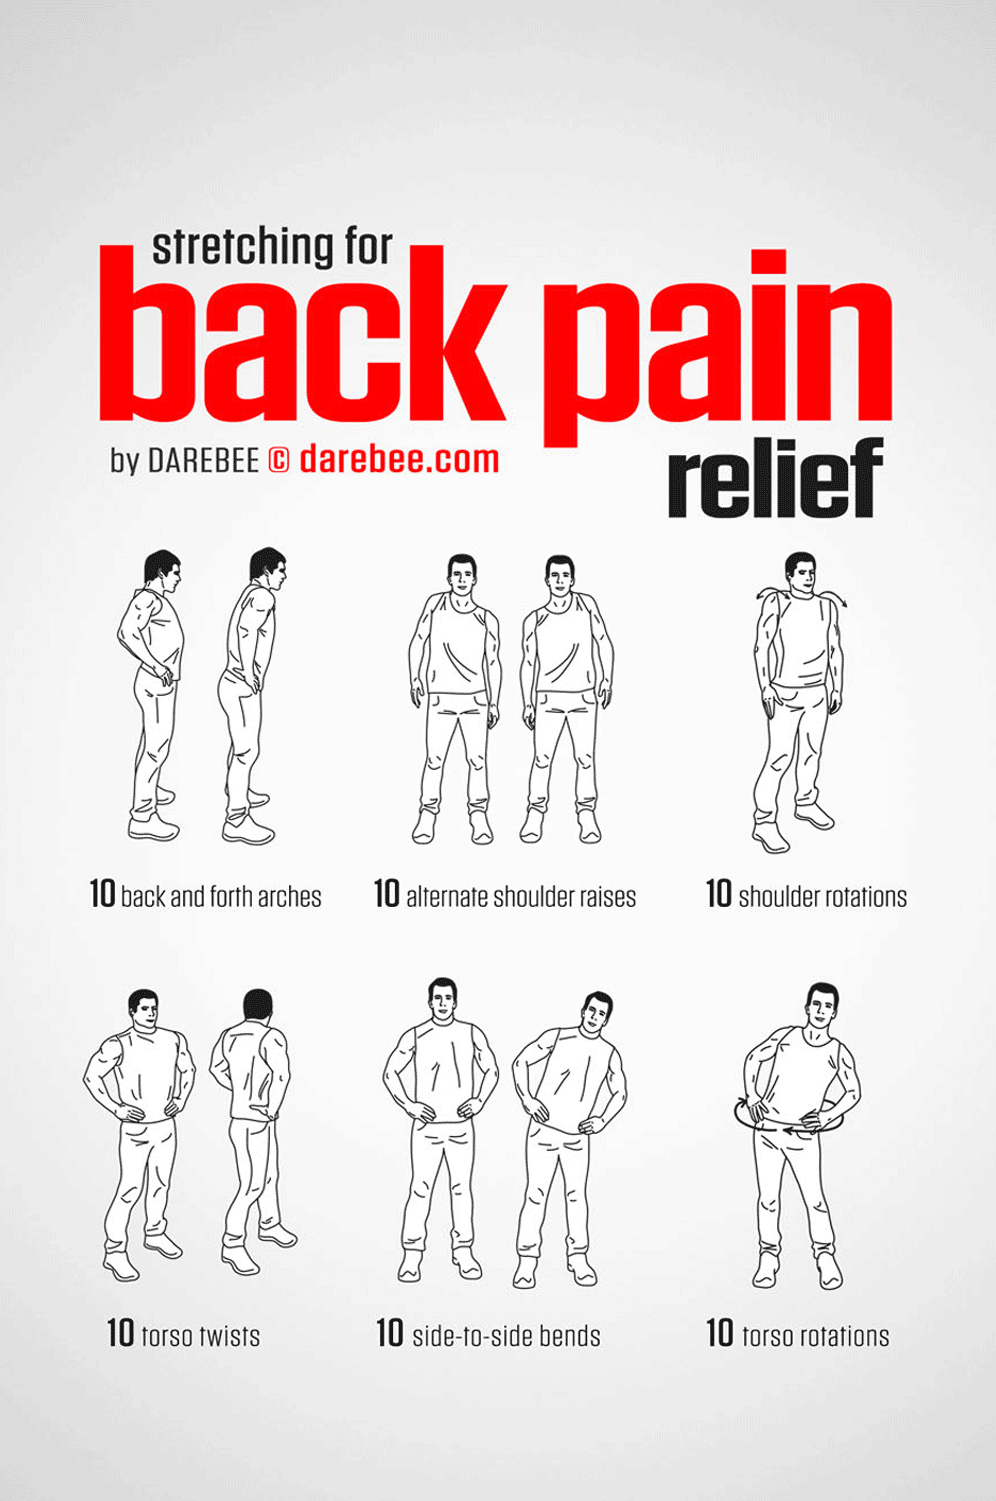 Streching for back pain